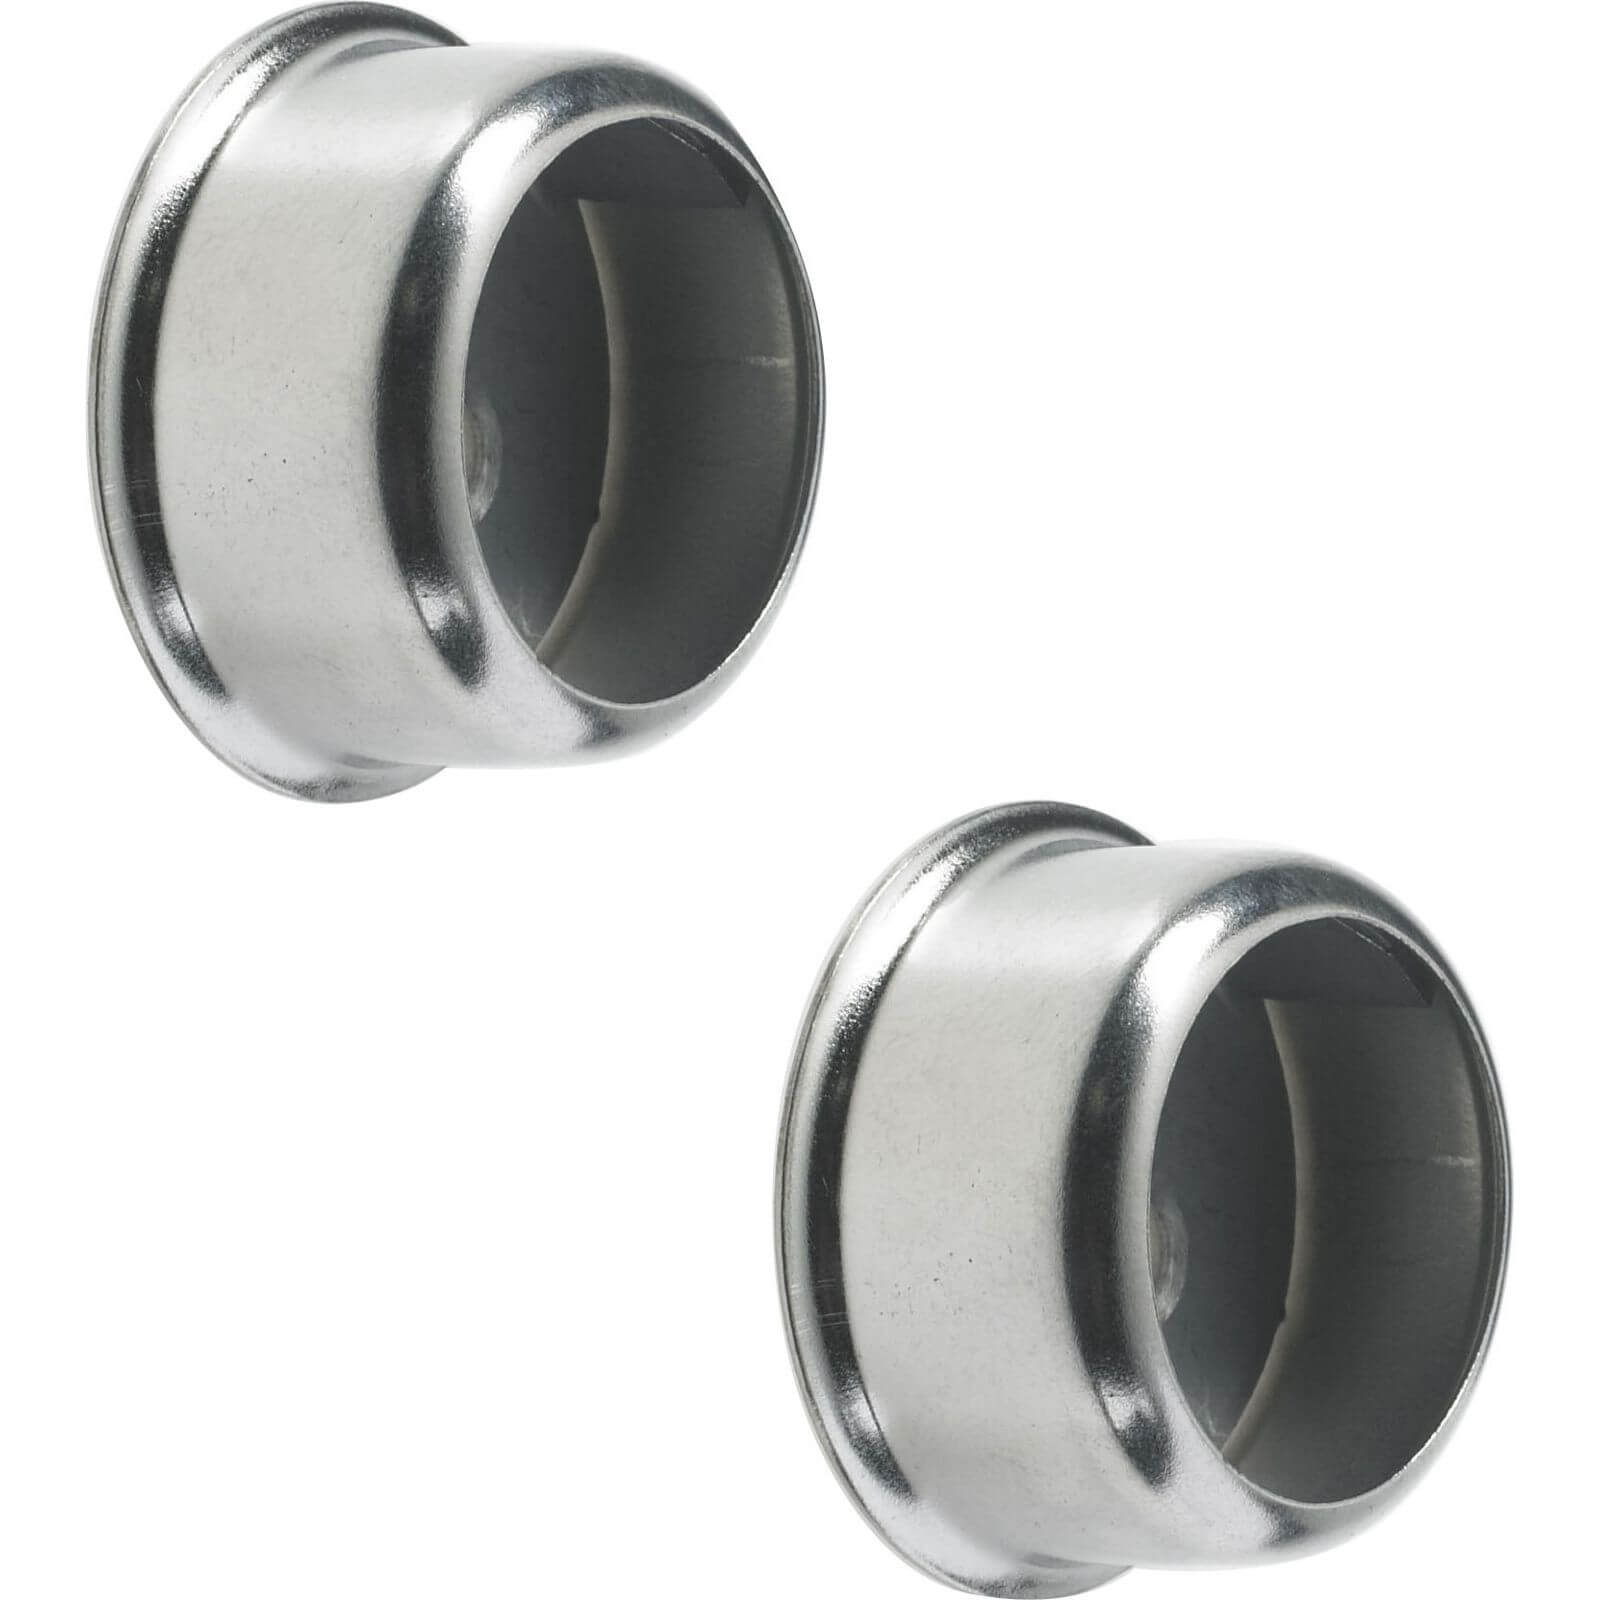 Photo of Invisifix Sockets - Chrome Plated - 19mm